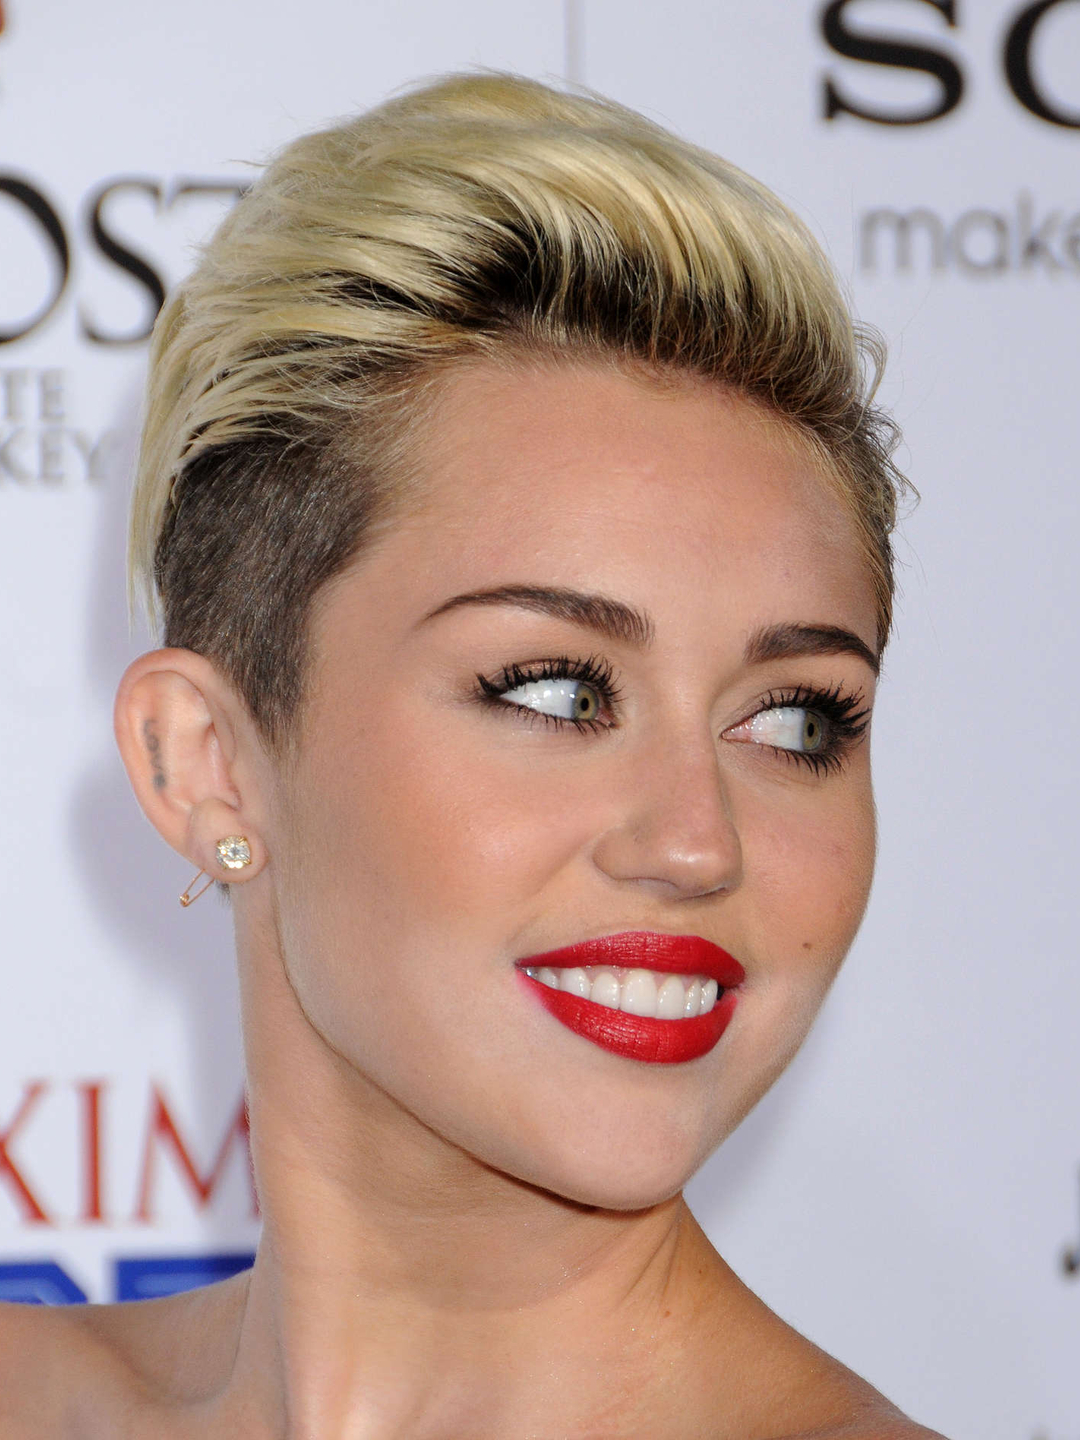 Miley Cyrus height and weight